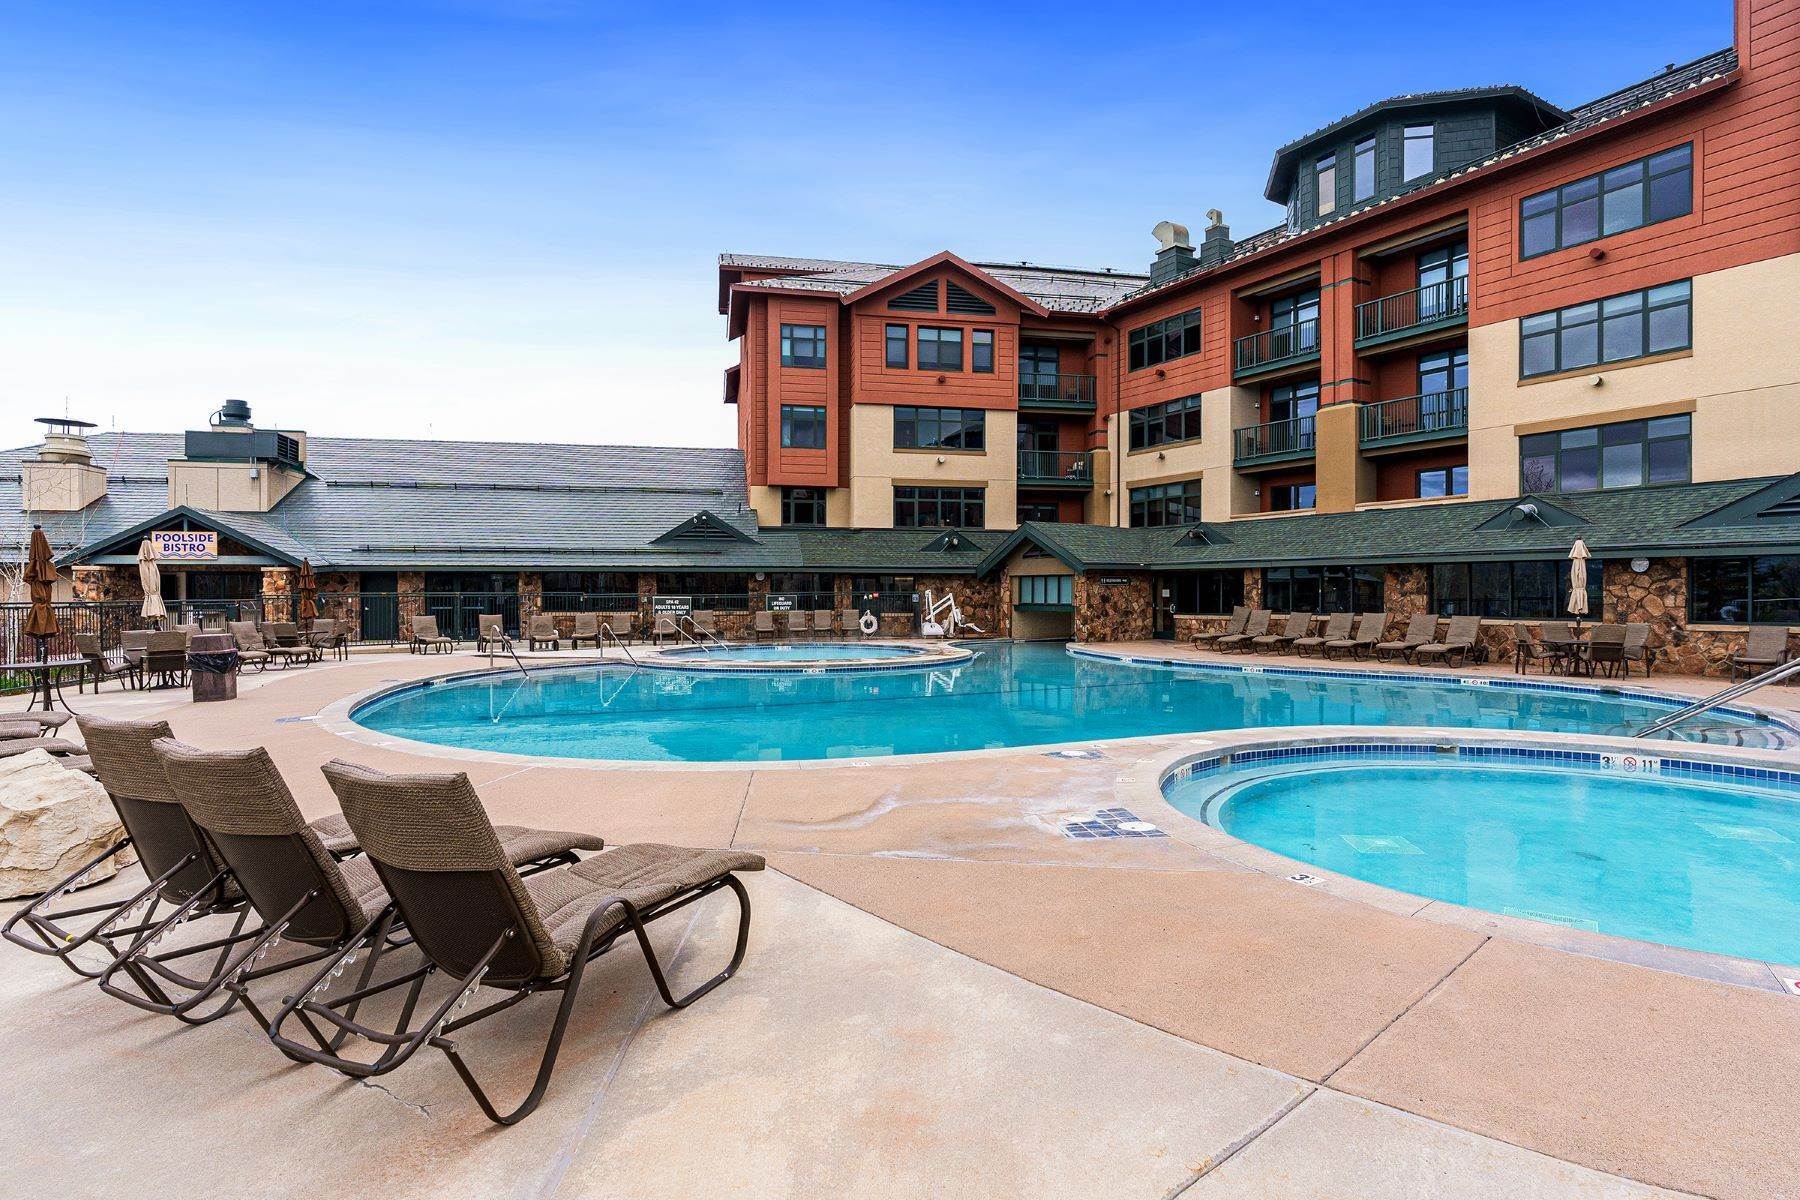 Property for Sale at 1/8 Share Alpenglow Grand Unit 2300 Mt. Werner Circle 316/318/319 Cal 6 Steamboat Springs, Colorado 80487 United States